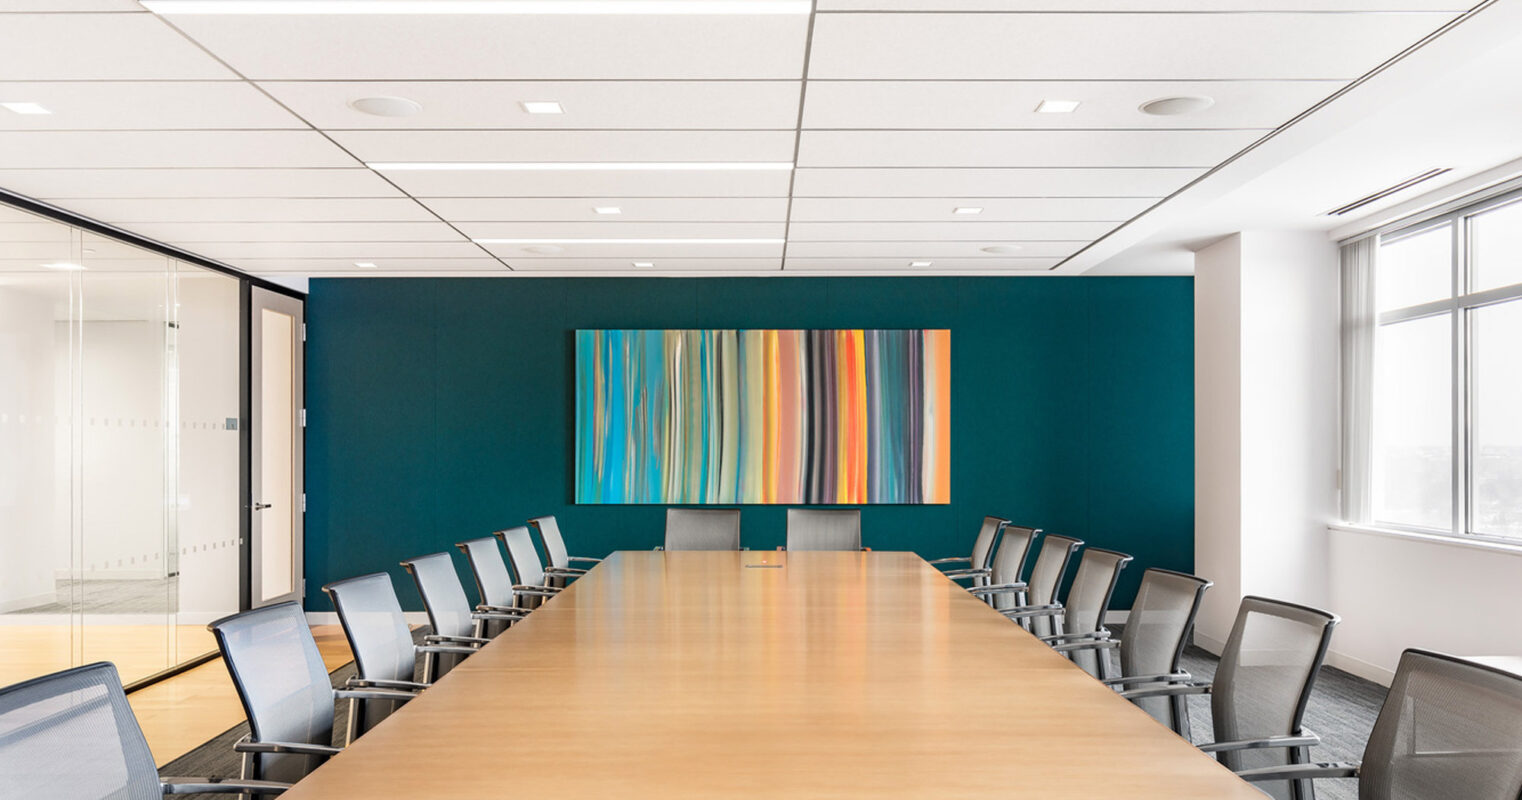 Modern conference room featuring a long, polished wooden table surrounded by sleek, black rolling chairs. A vibrant, striped art piece commands attention against a deep teal accent wall, while the natural light from adjacent windows enhances the room's spacious, clean aesthetic.